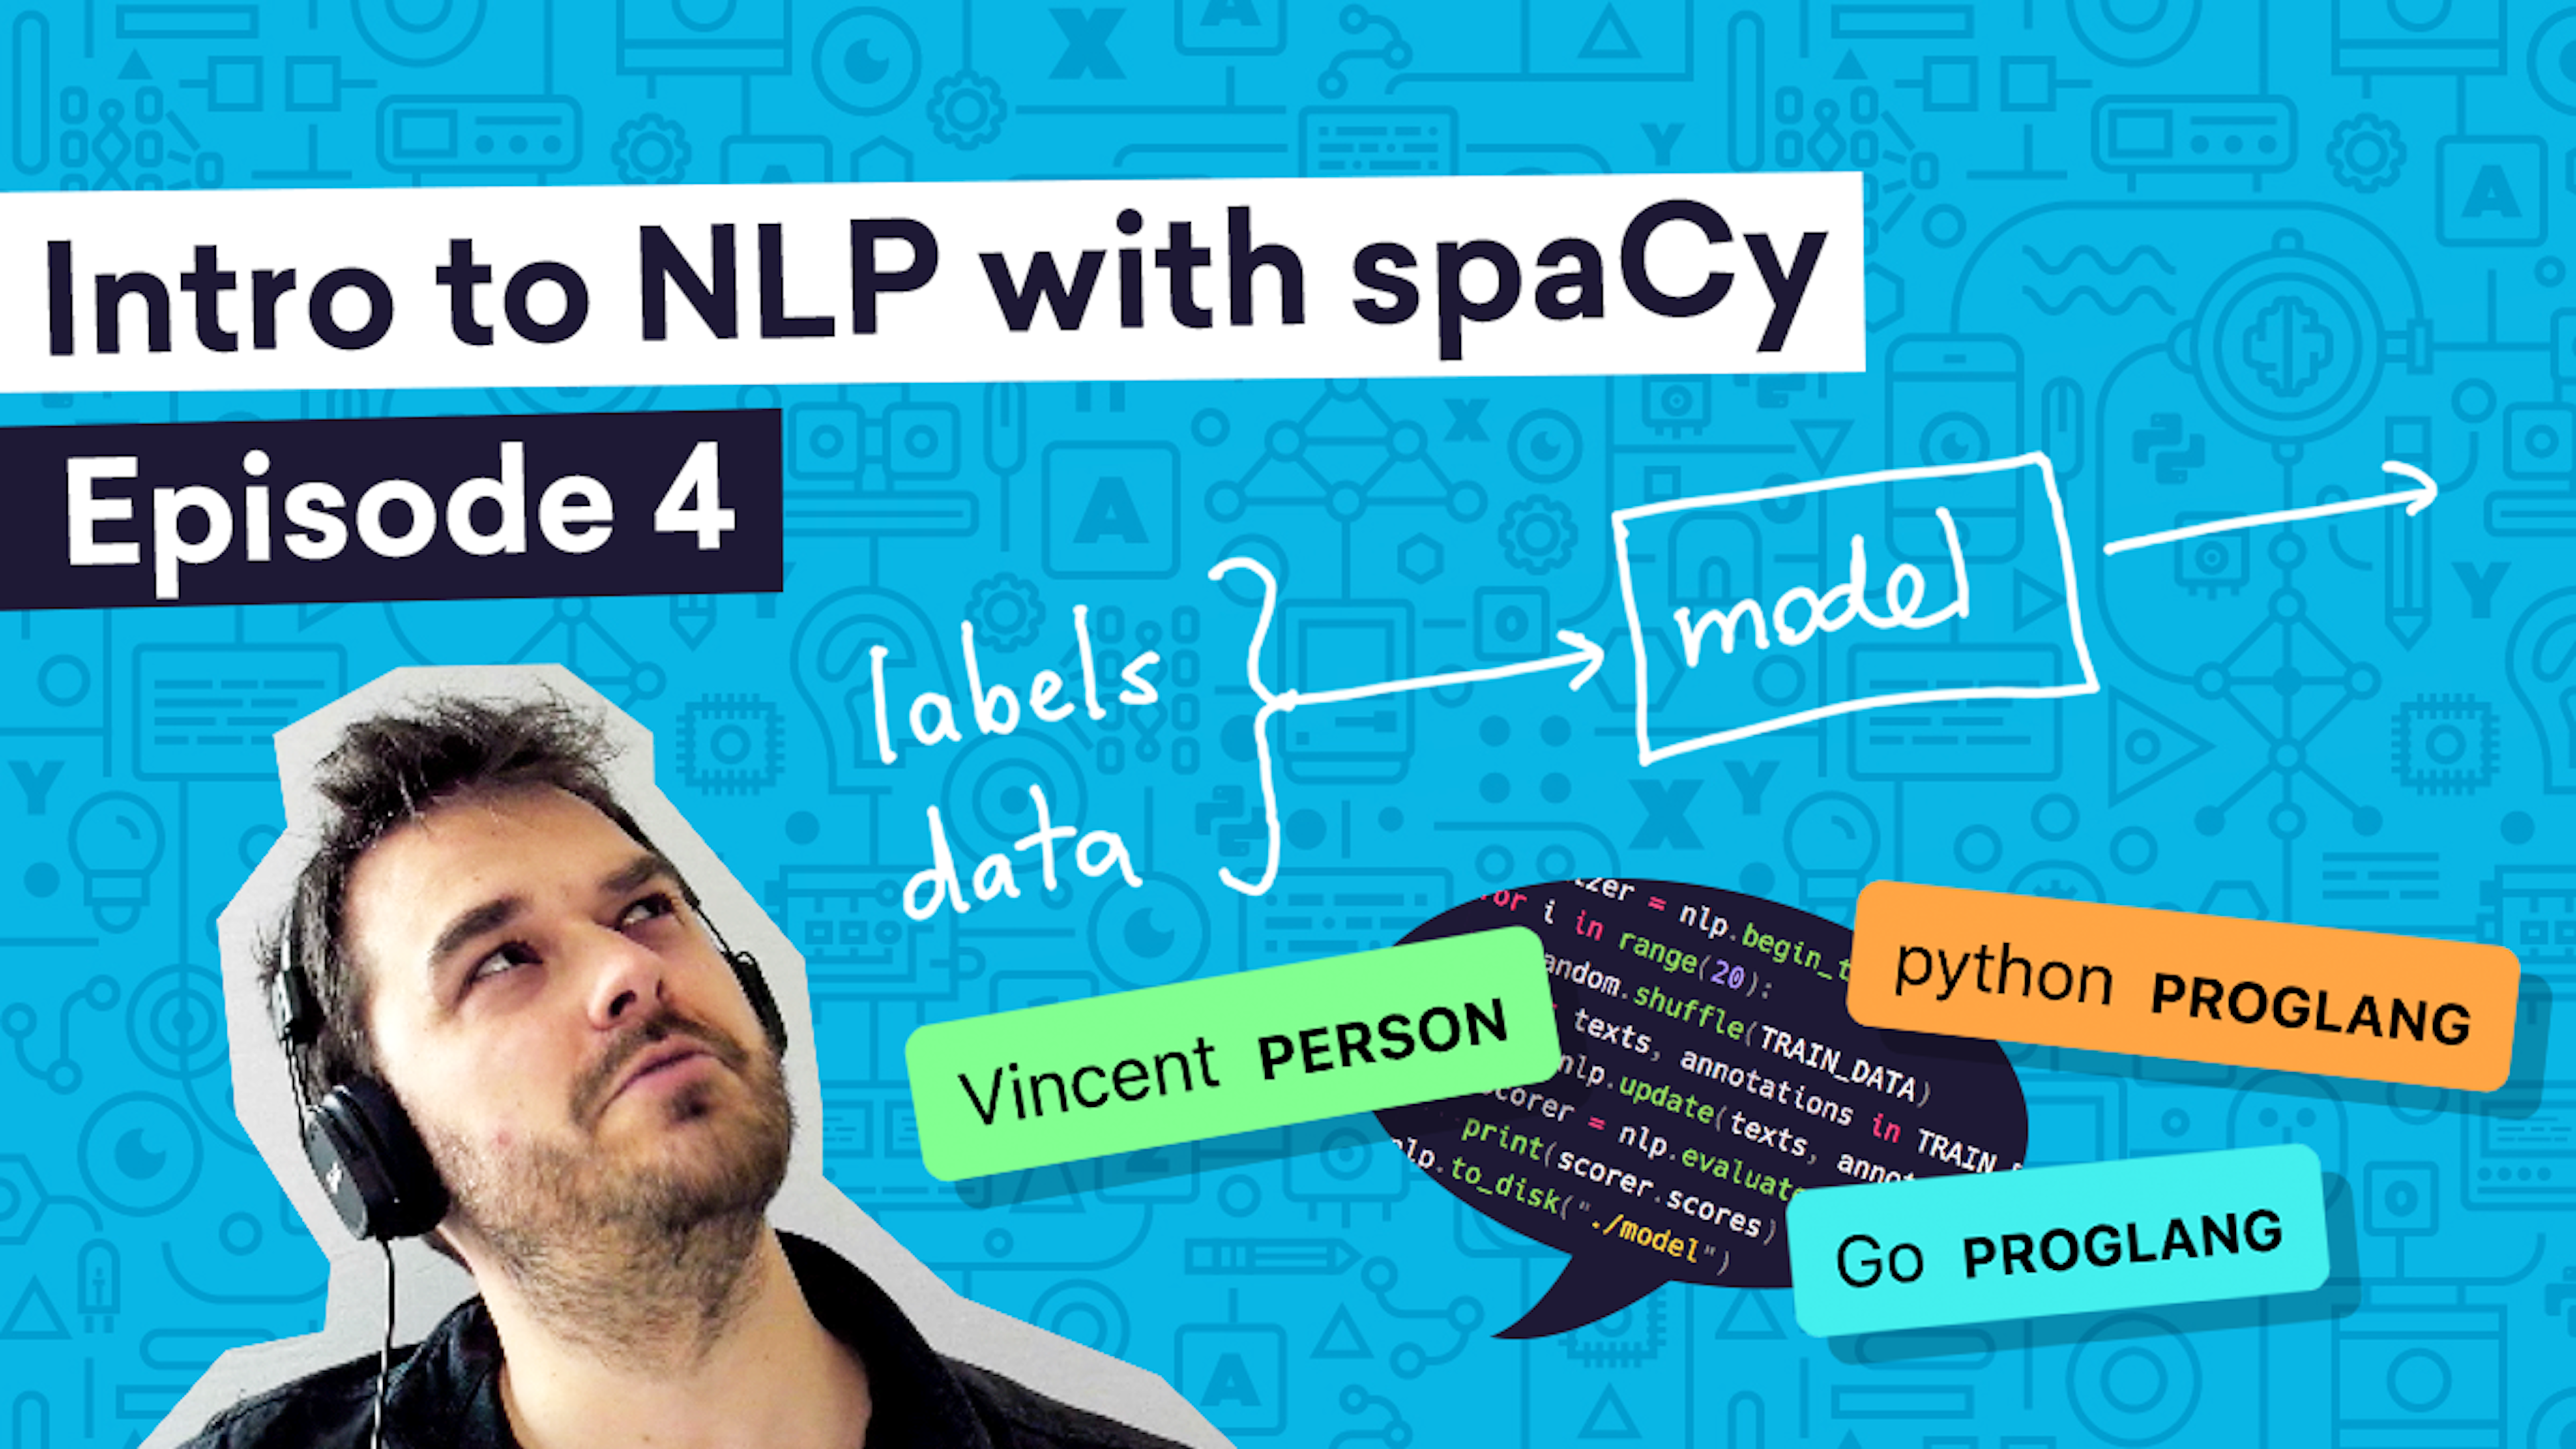 Intro to NLP with spaCy (4): Detecting programming languages